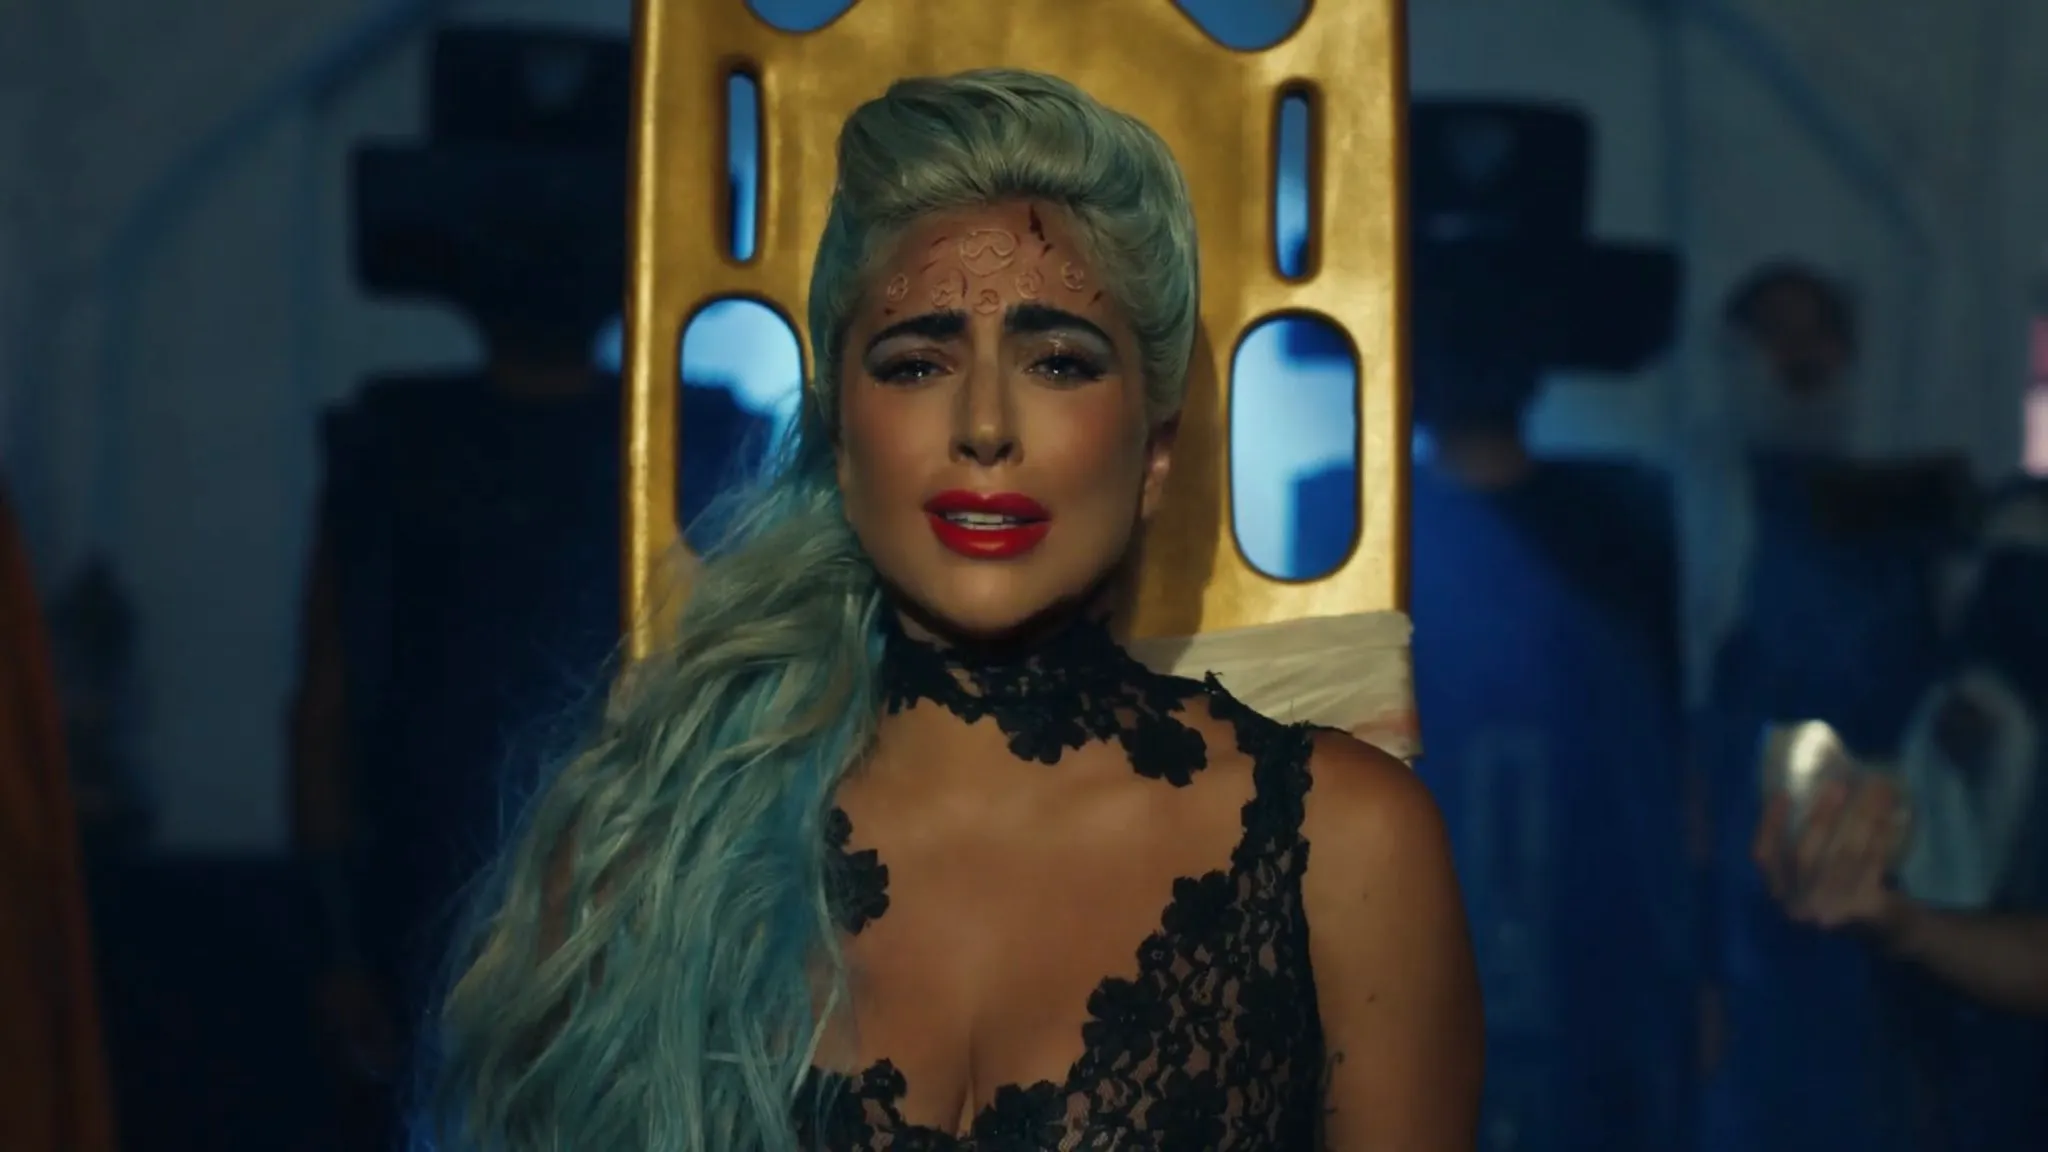 Lady Gaga drops 911 video with shock car accident twist and 'poetic' meaning